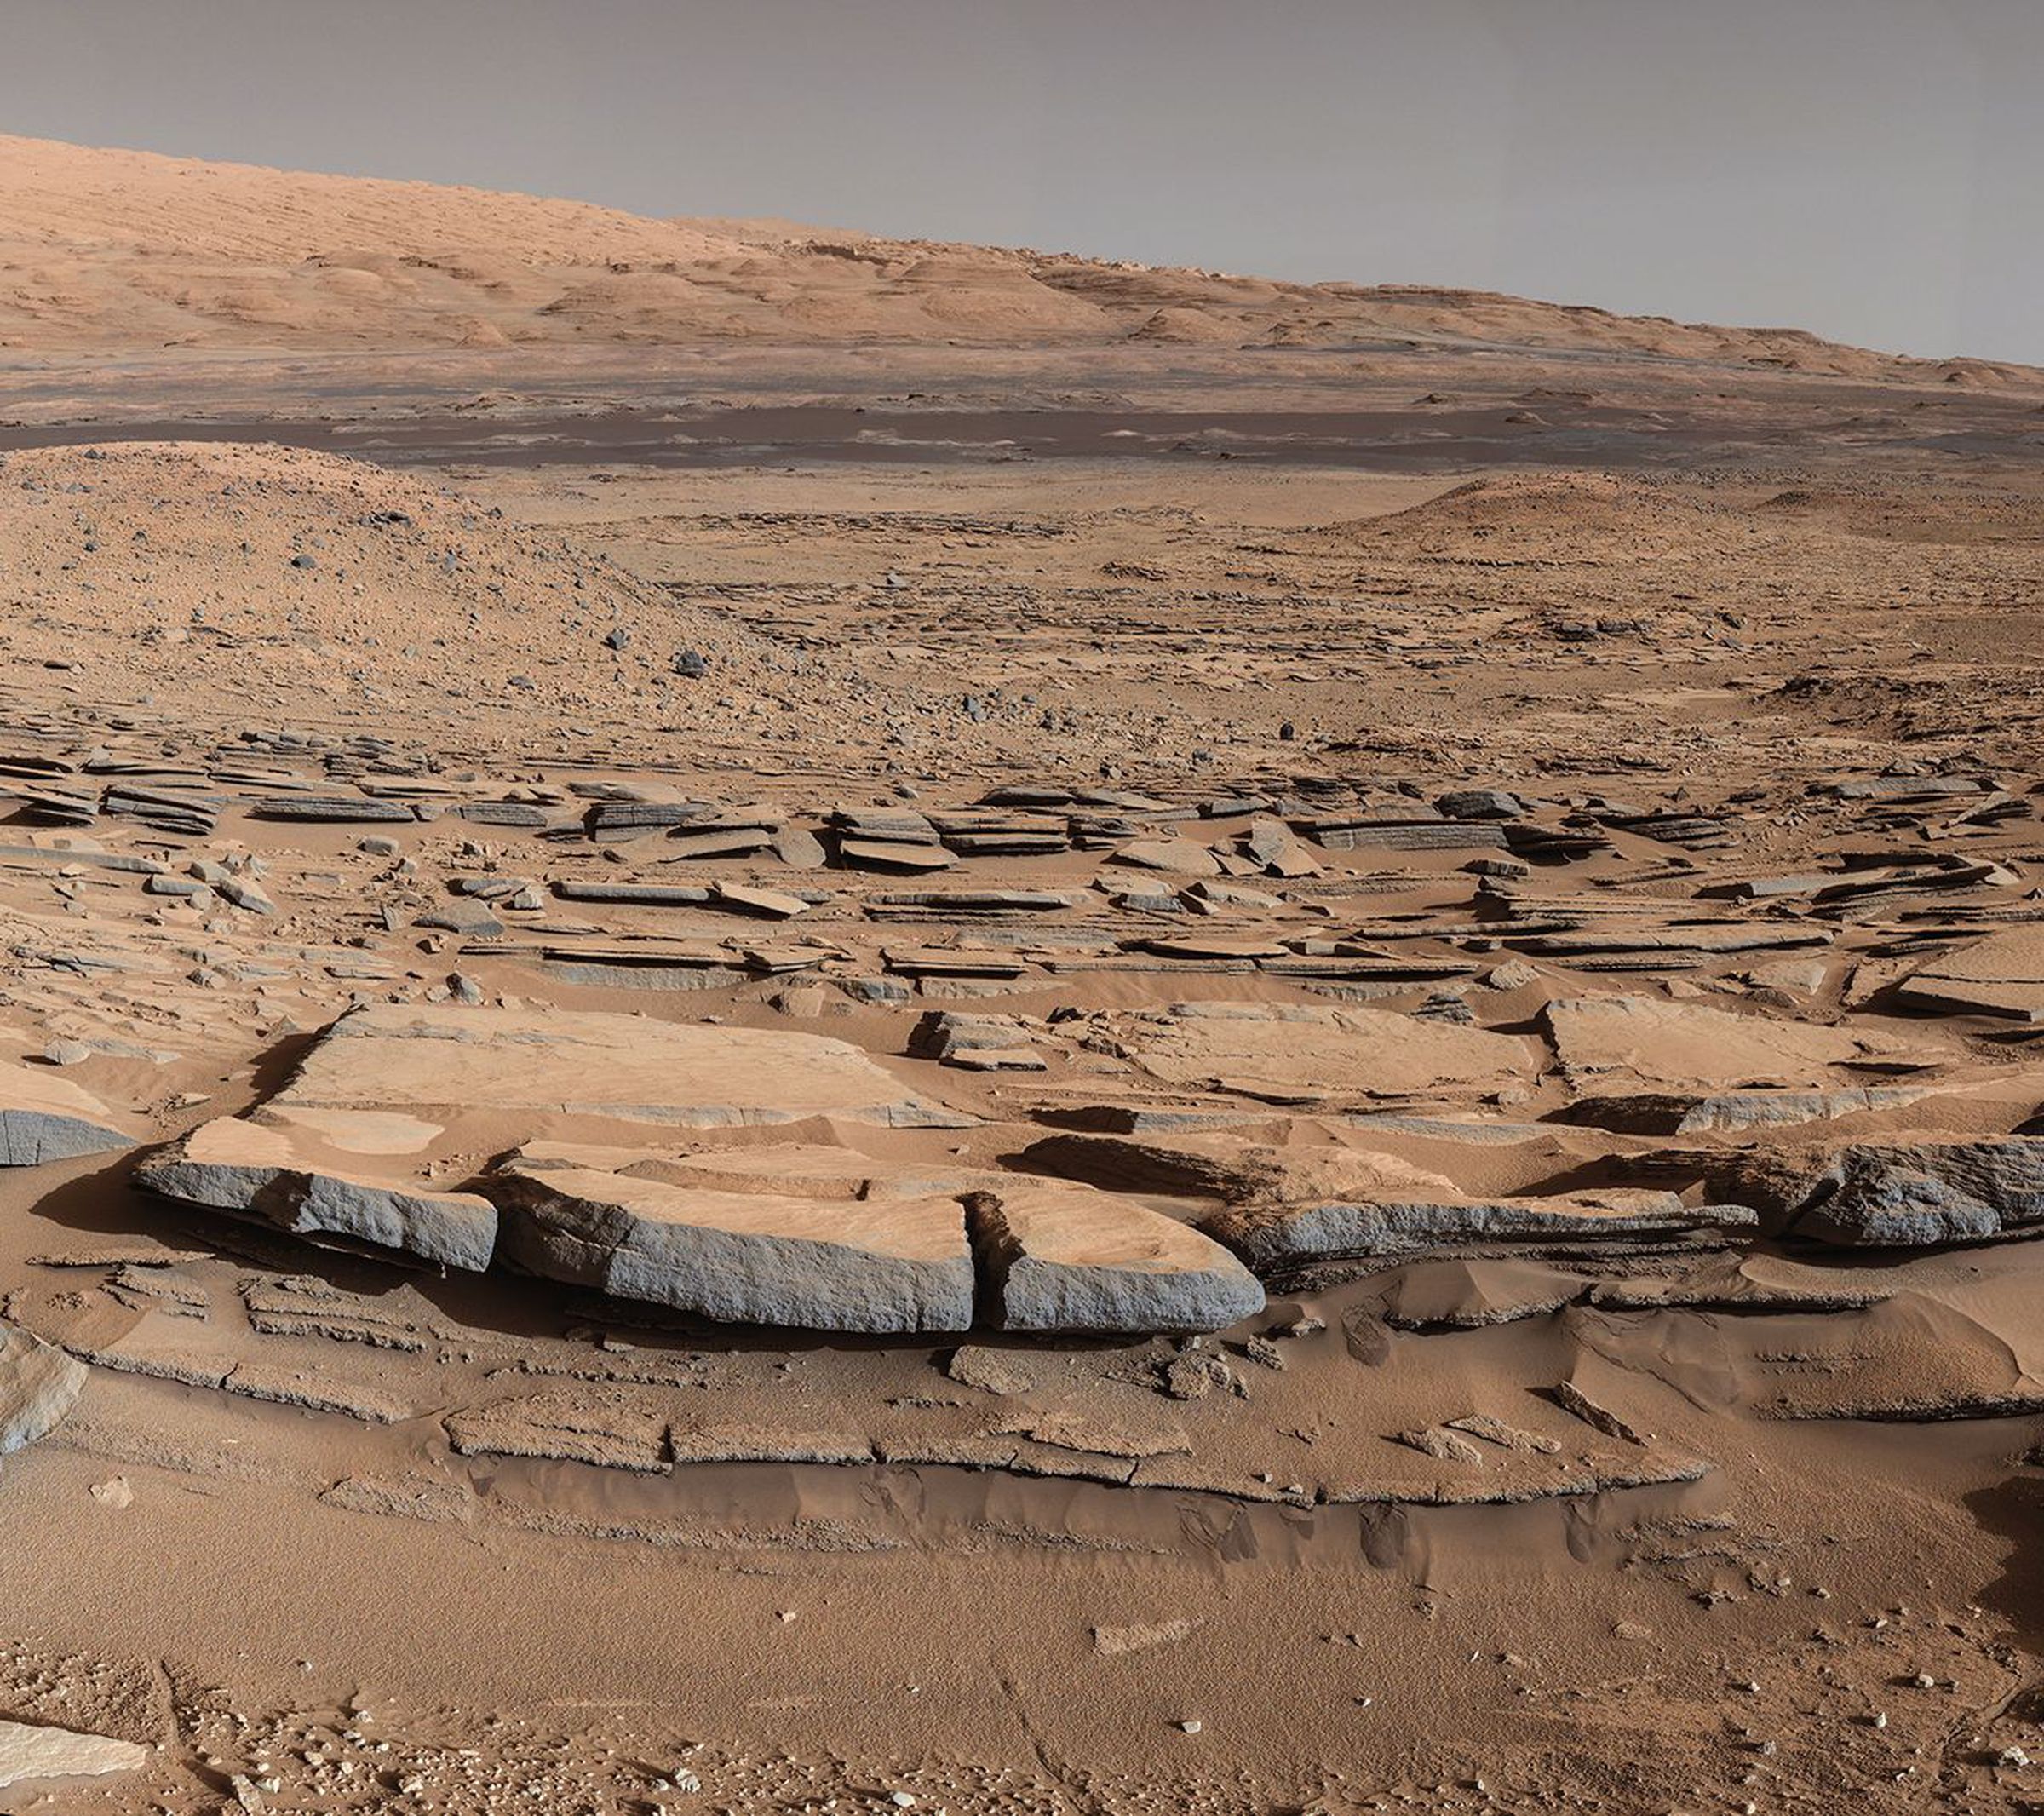 Sediment deposited into ancient lakes on Mars.